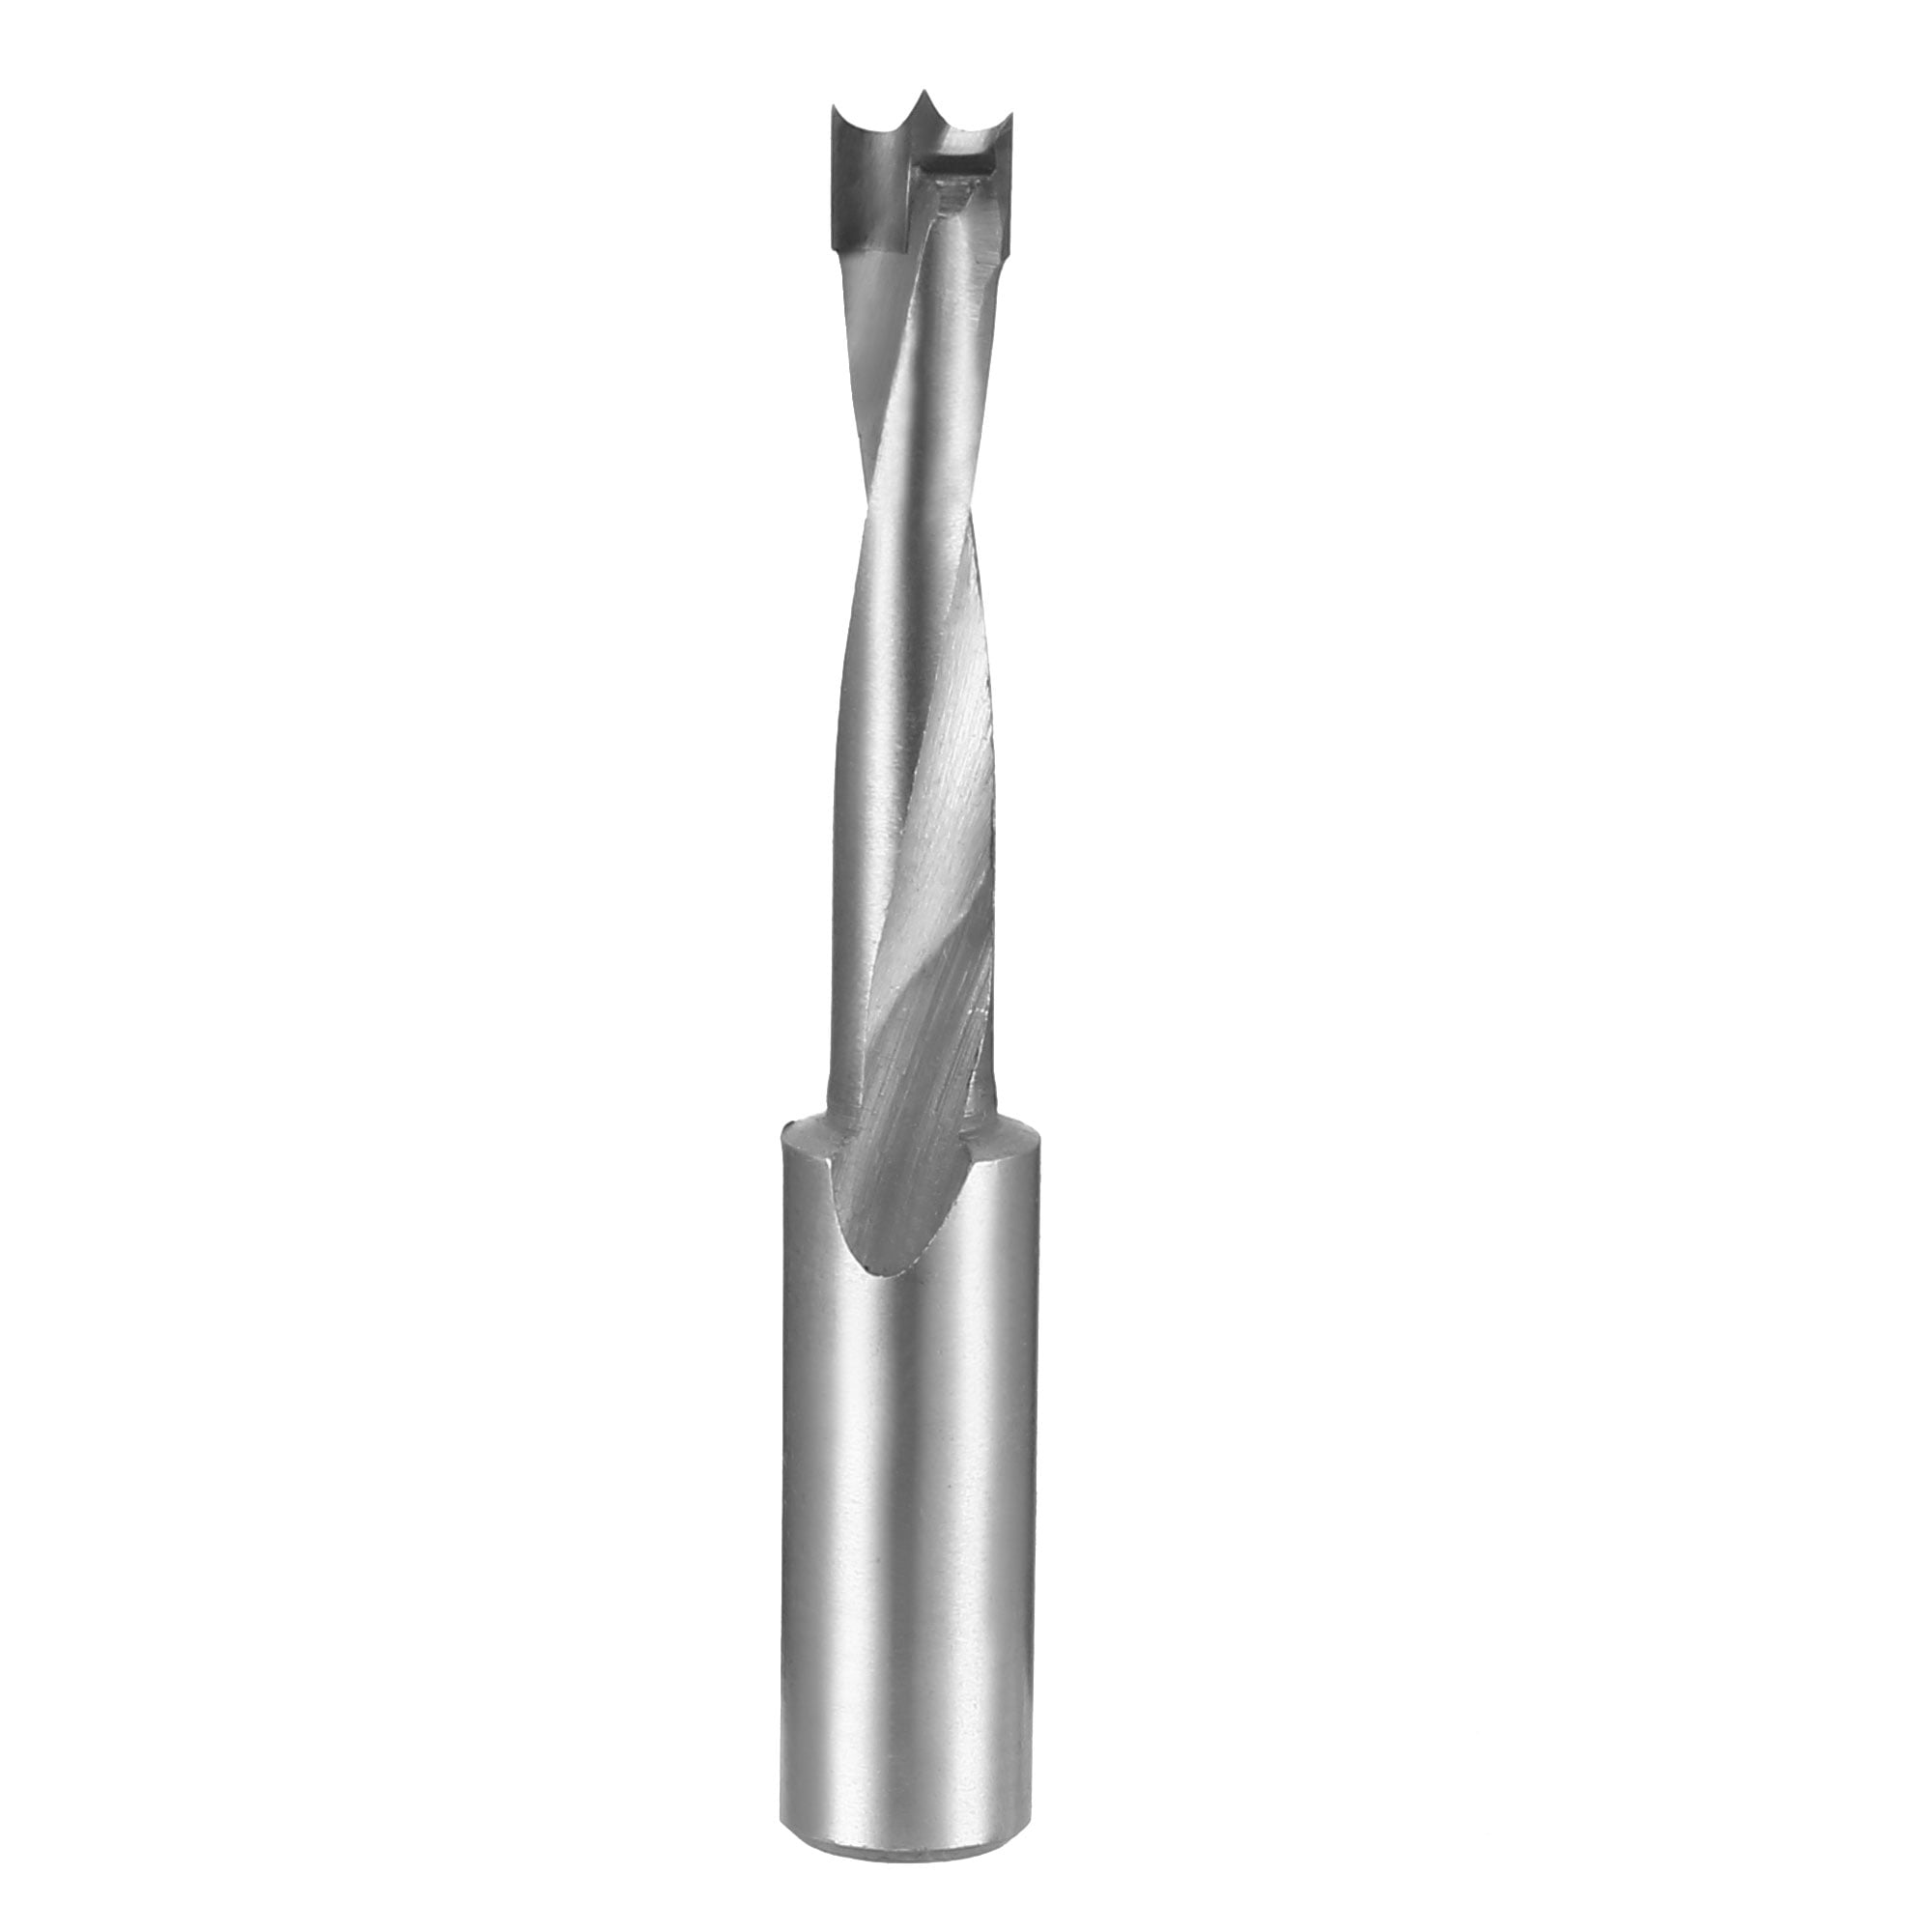 Brad Point Drill Bits for Wood 7mm x 68mm Right Turning Carbide for  Woodworking Carpentry Drilling Tools 